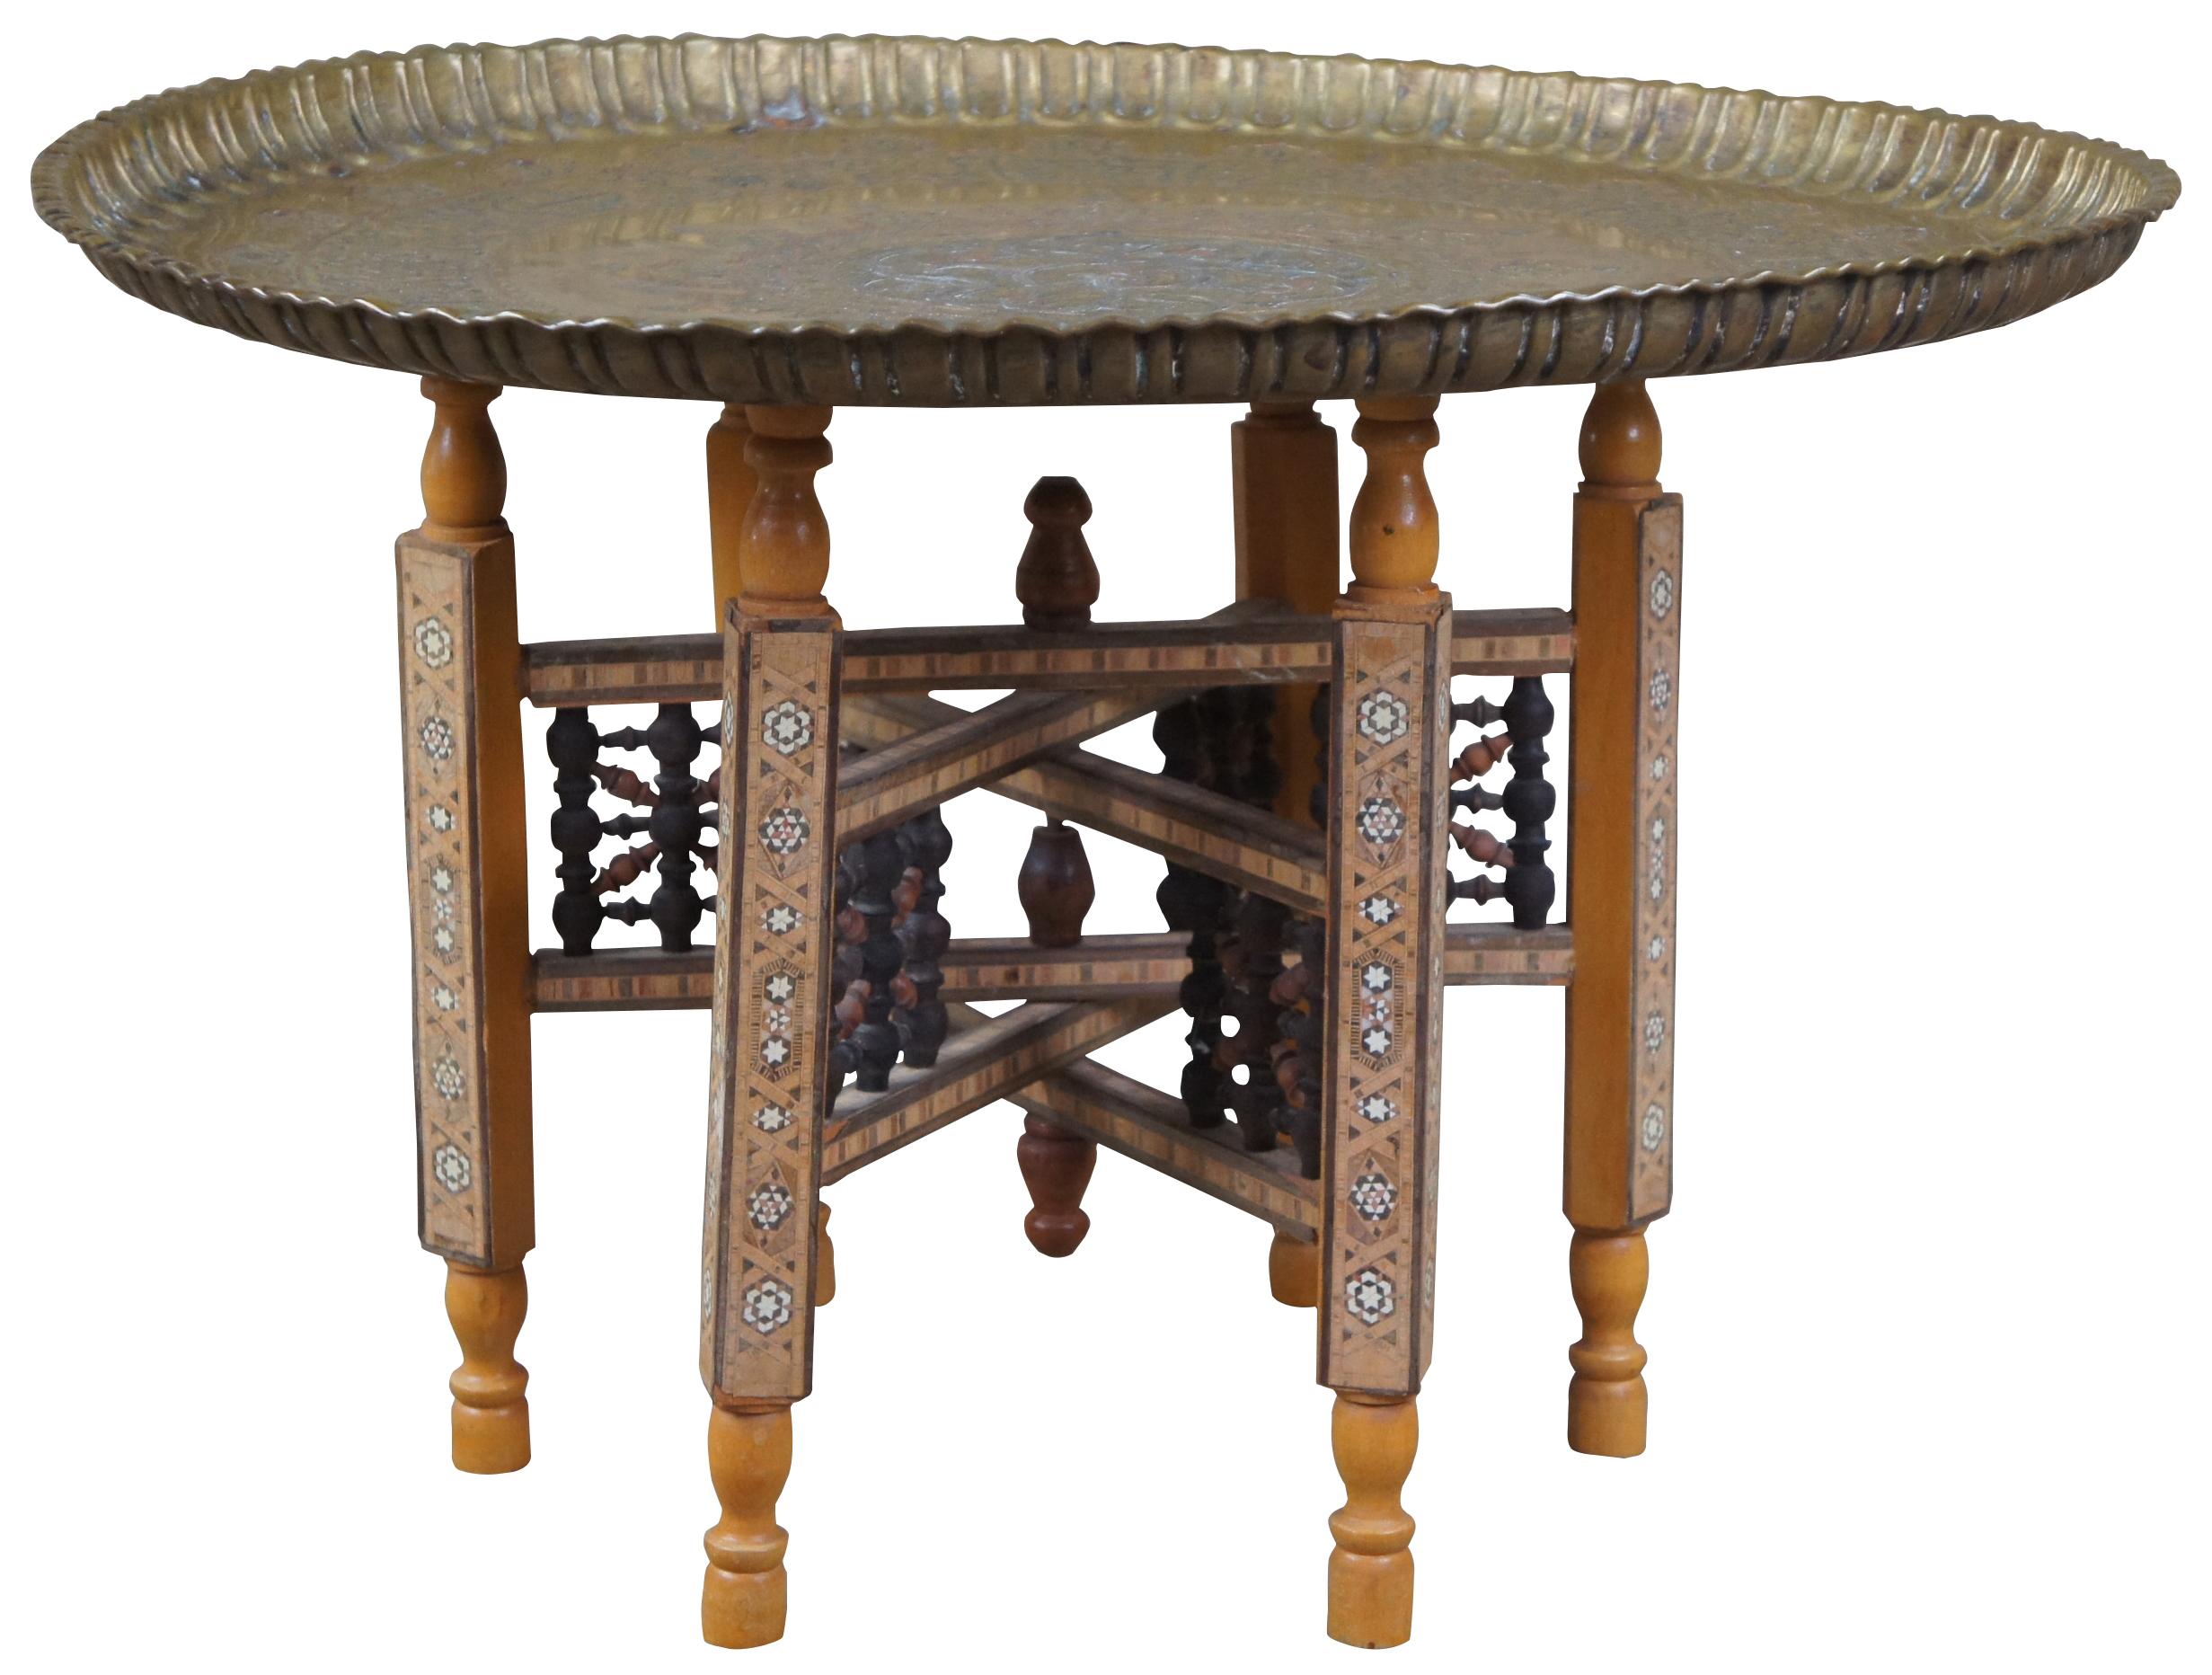 Antique Damascus tray table. Features an etched caligraphy tray with copper accents. The tray is supported by a micromosaic folding base with bone inlay and spool turnings.
   